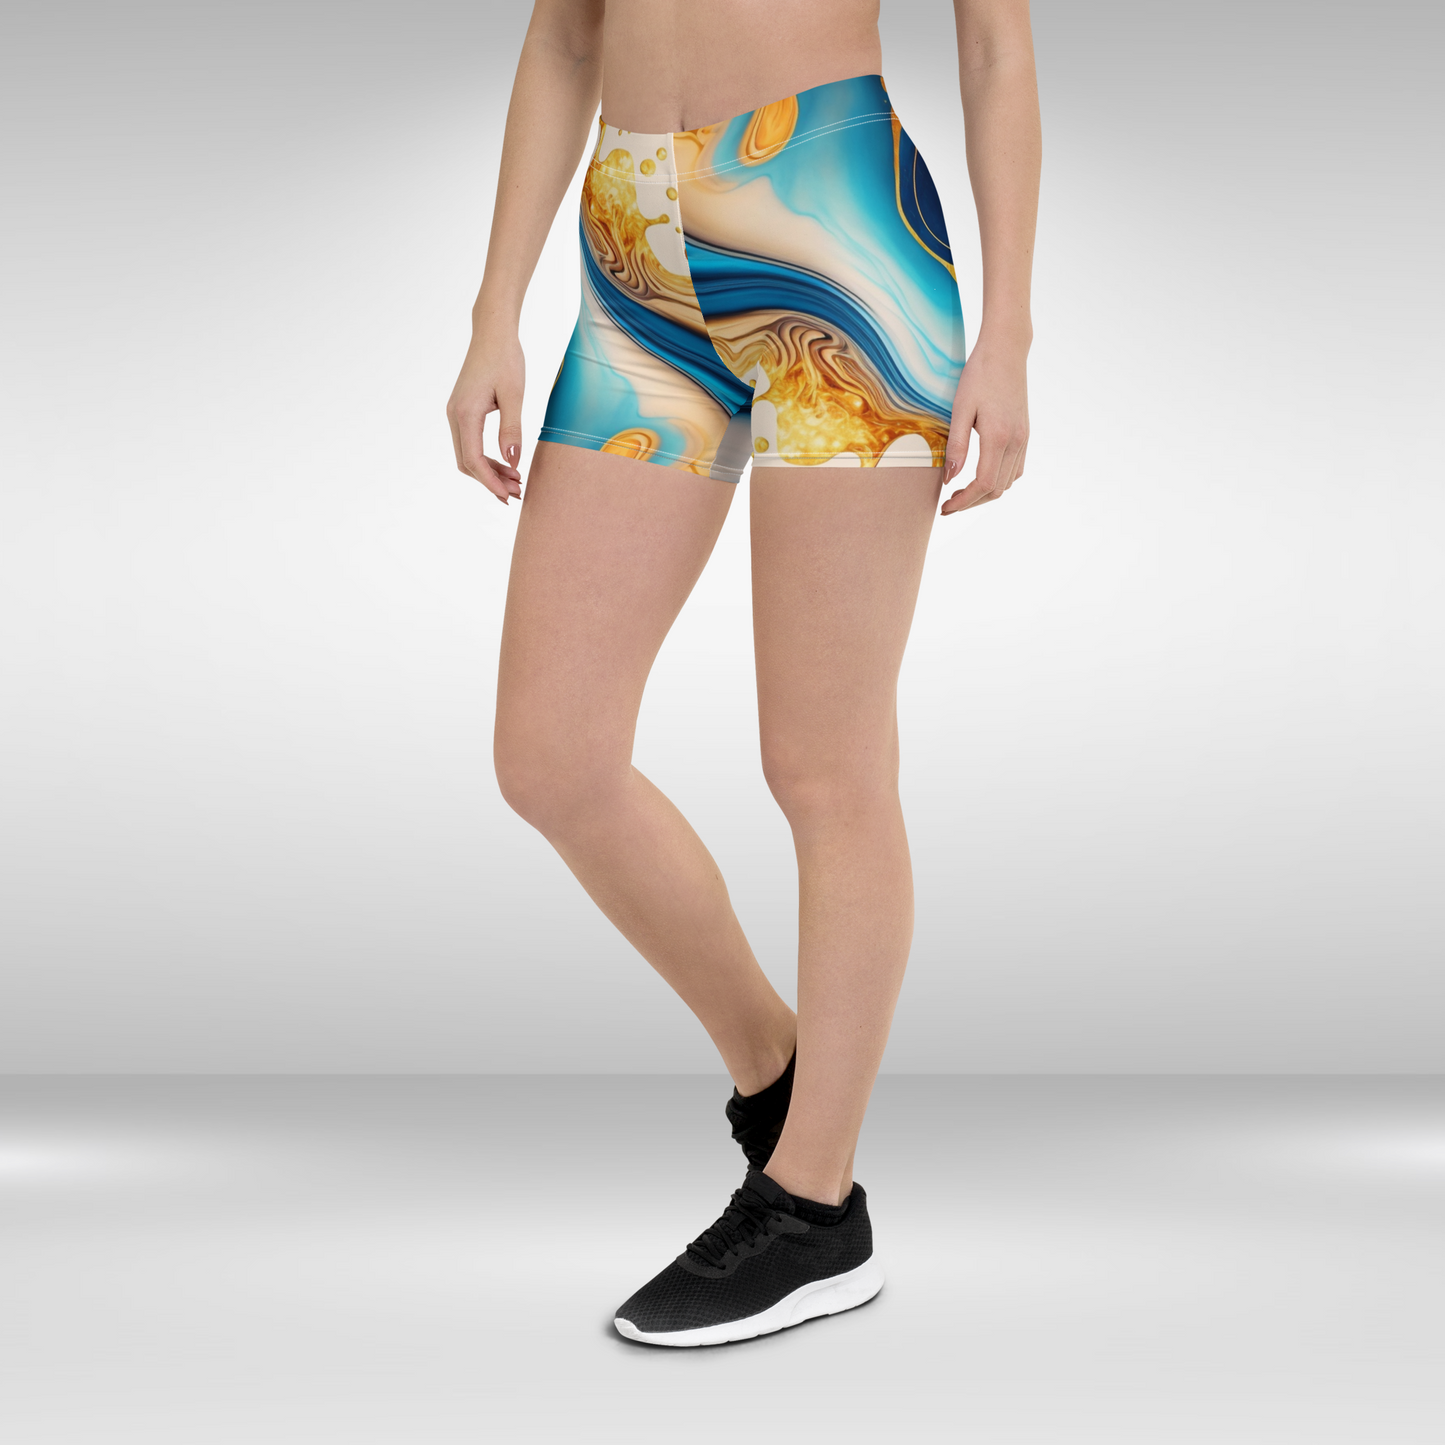 Women Mid Waist Shorts - Blue and Gold Abstract Print